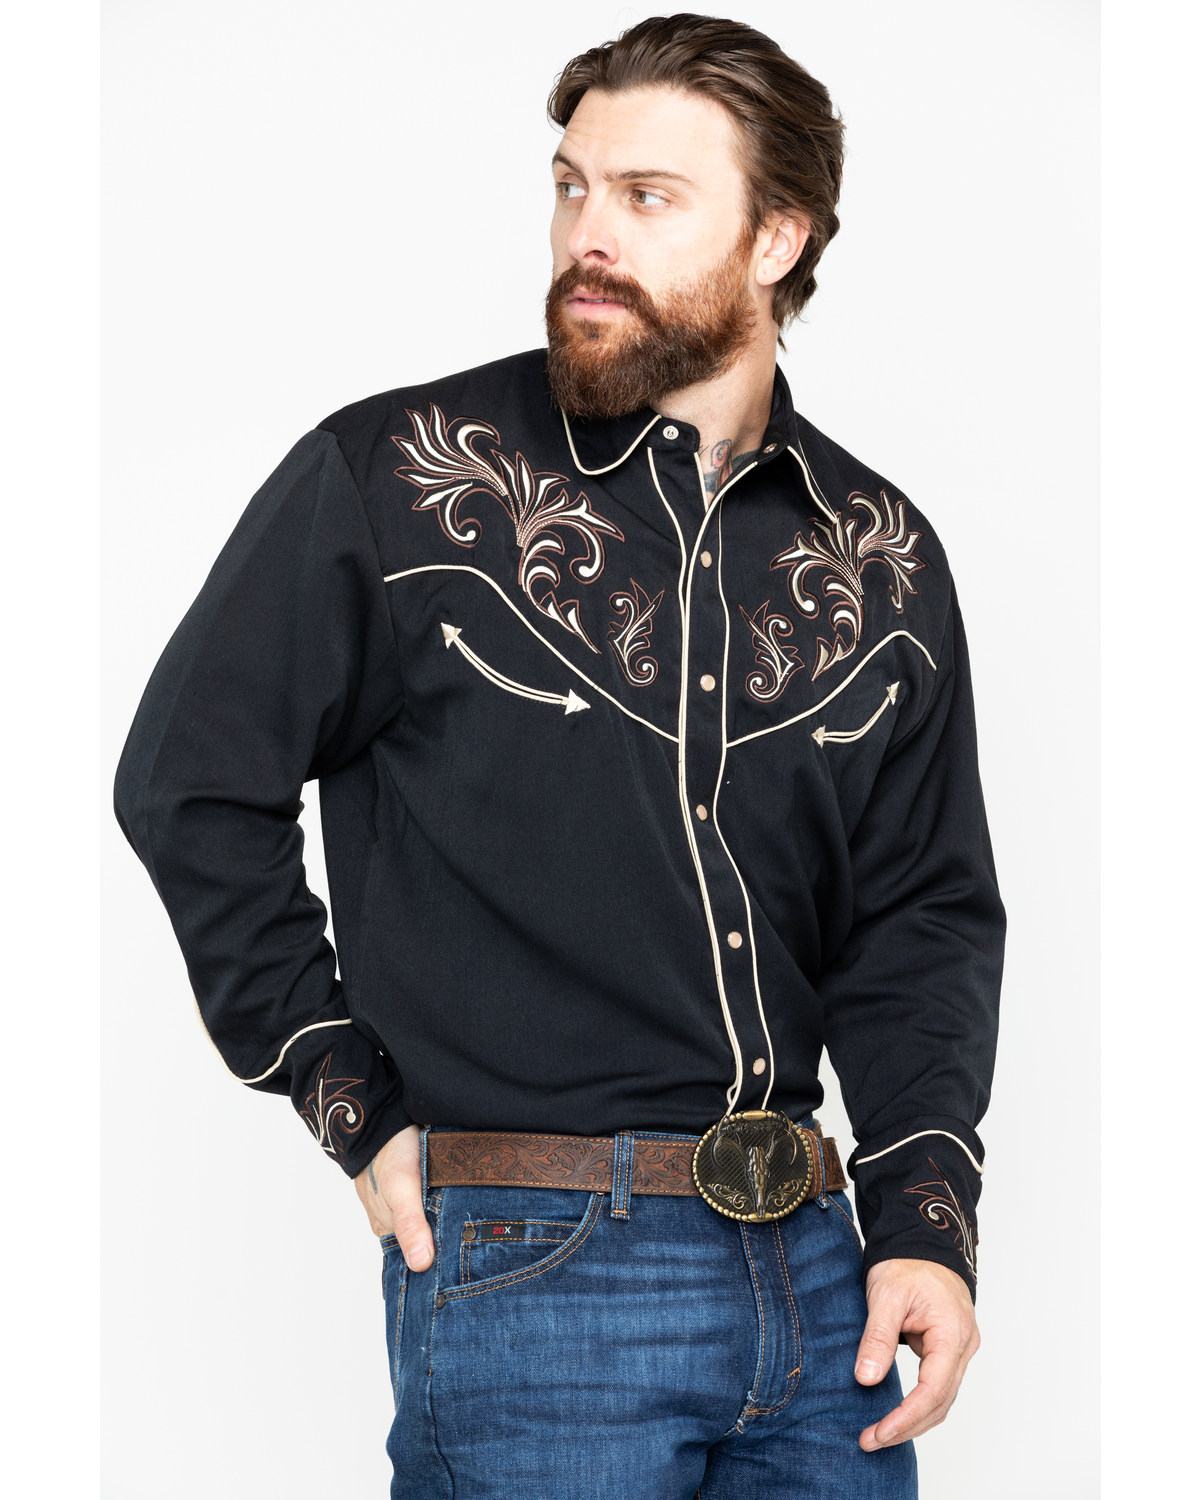 Scully Men's Embroidered Long Sleeve Western Shirt